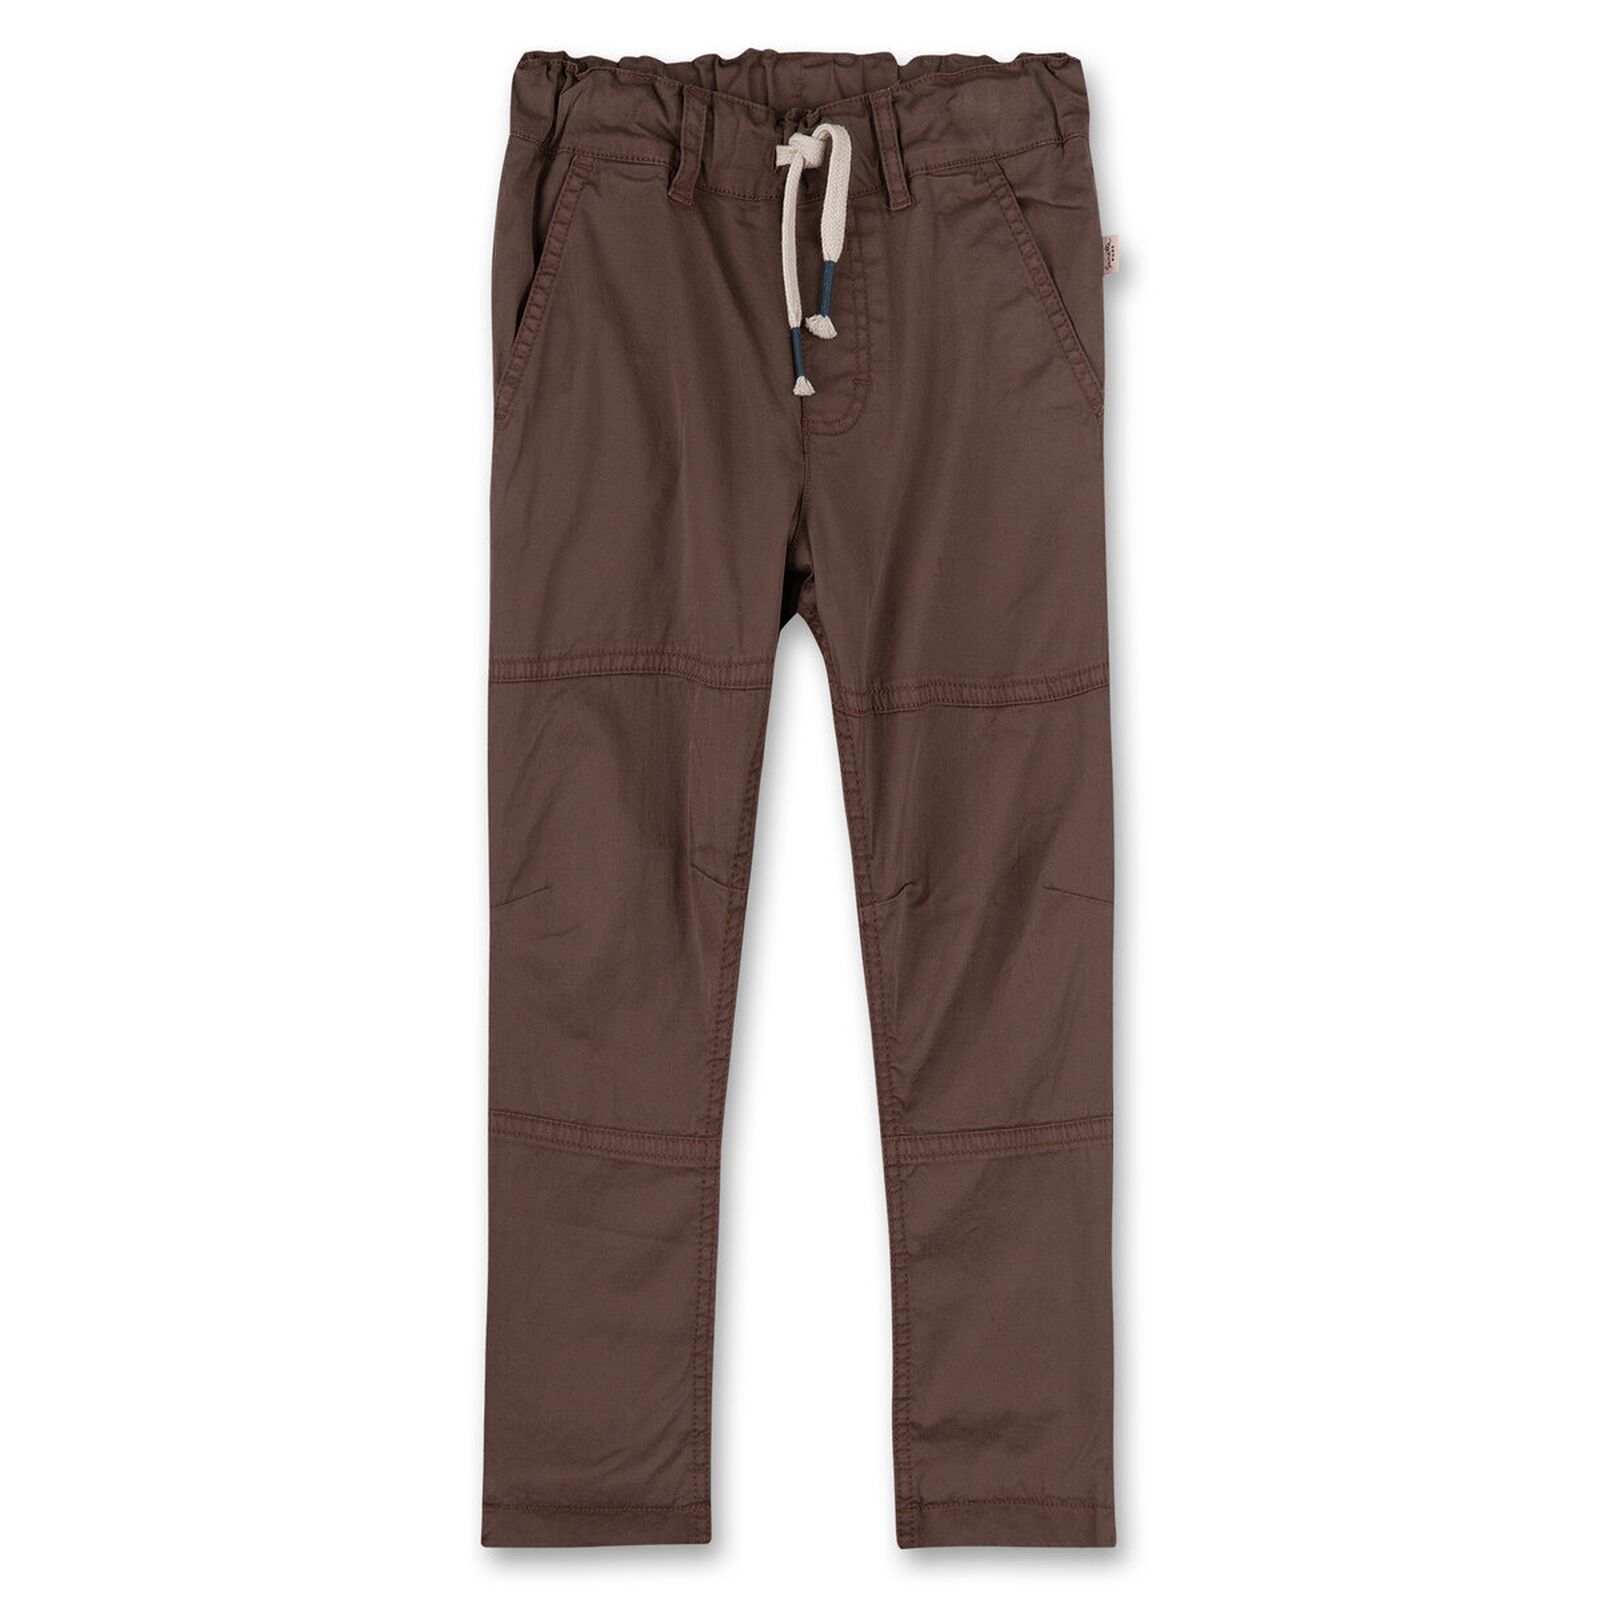 Trousers lined brown 128